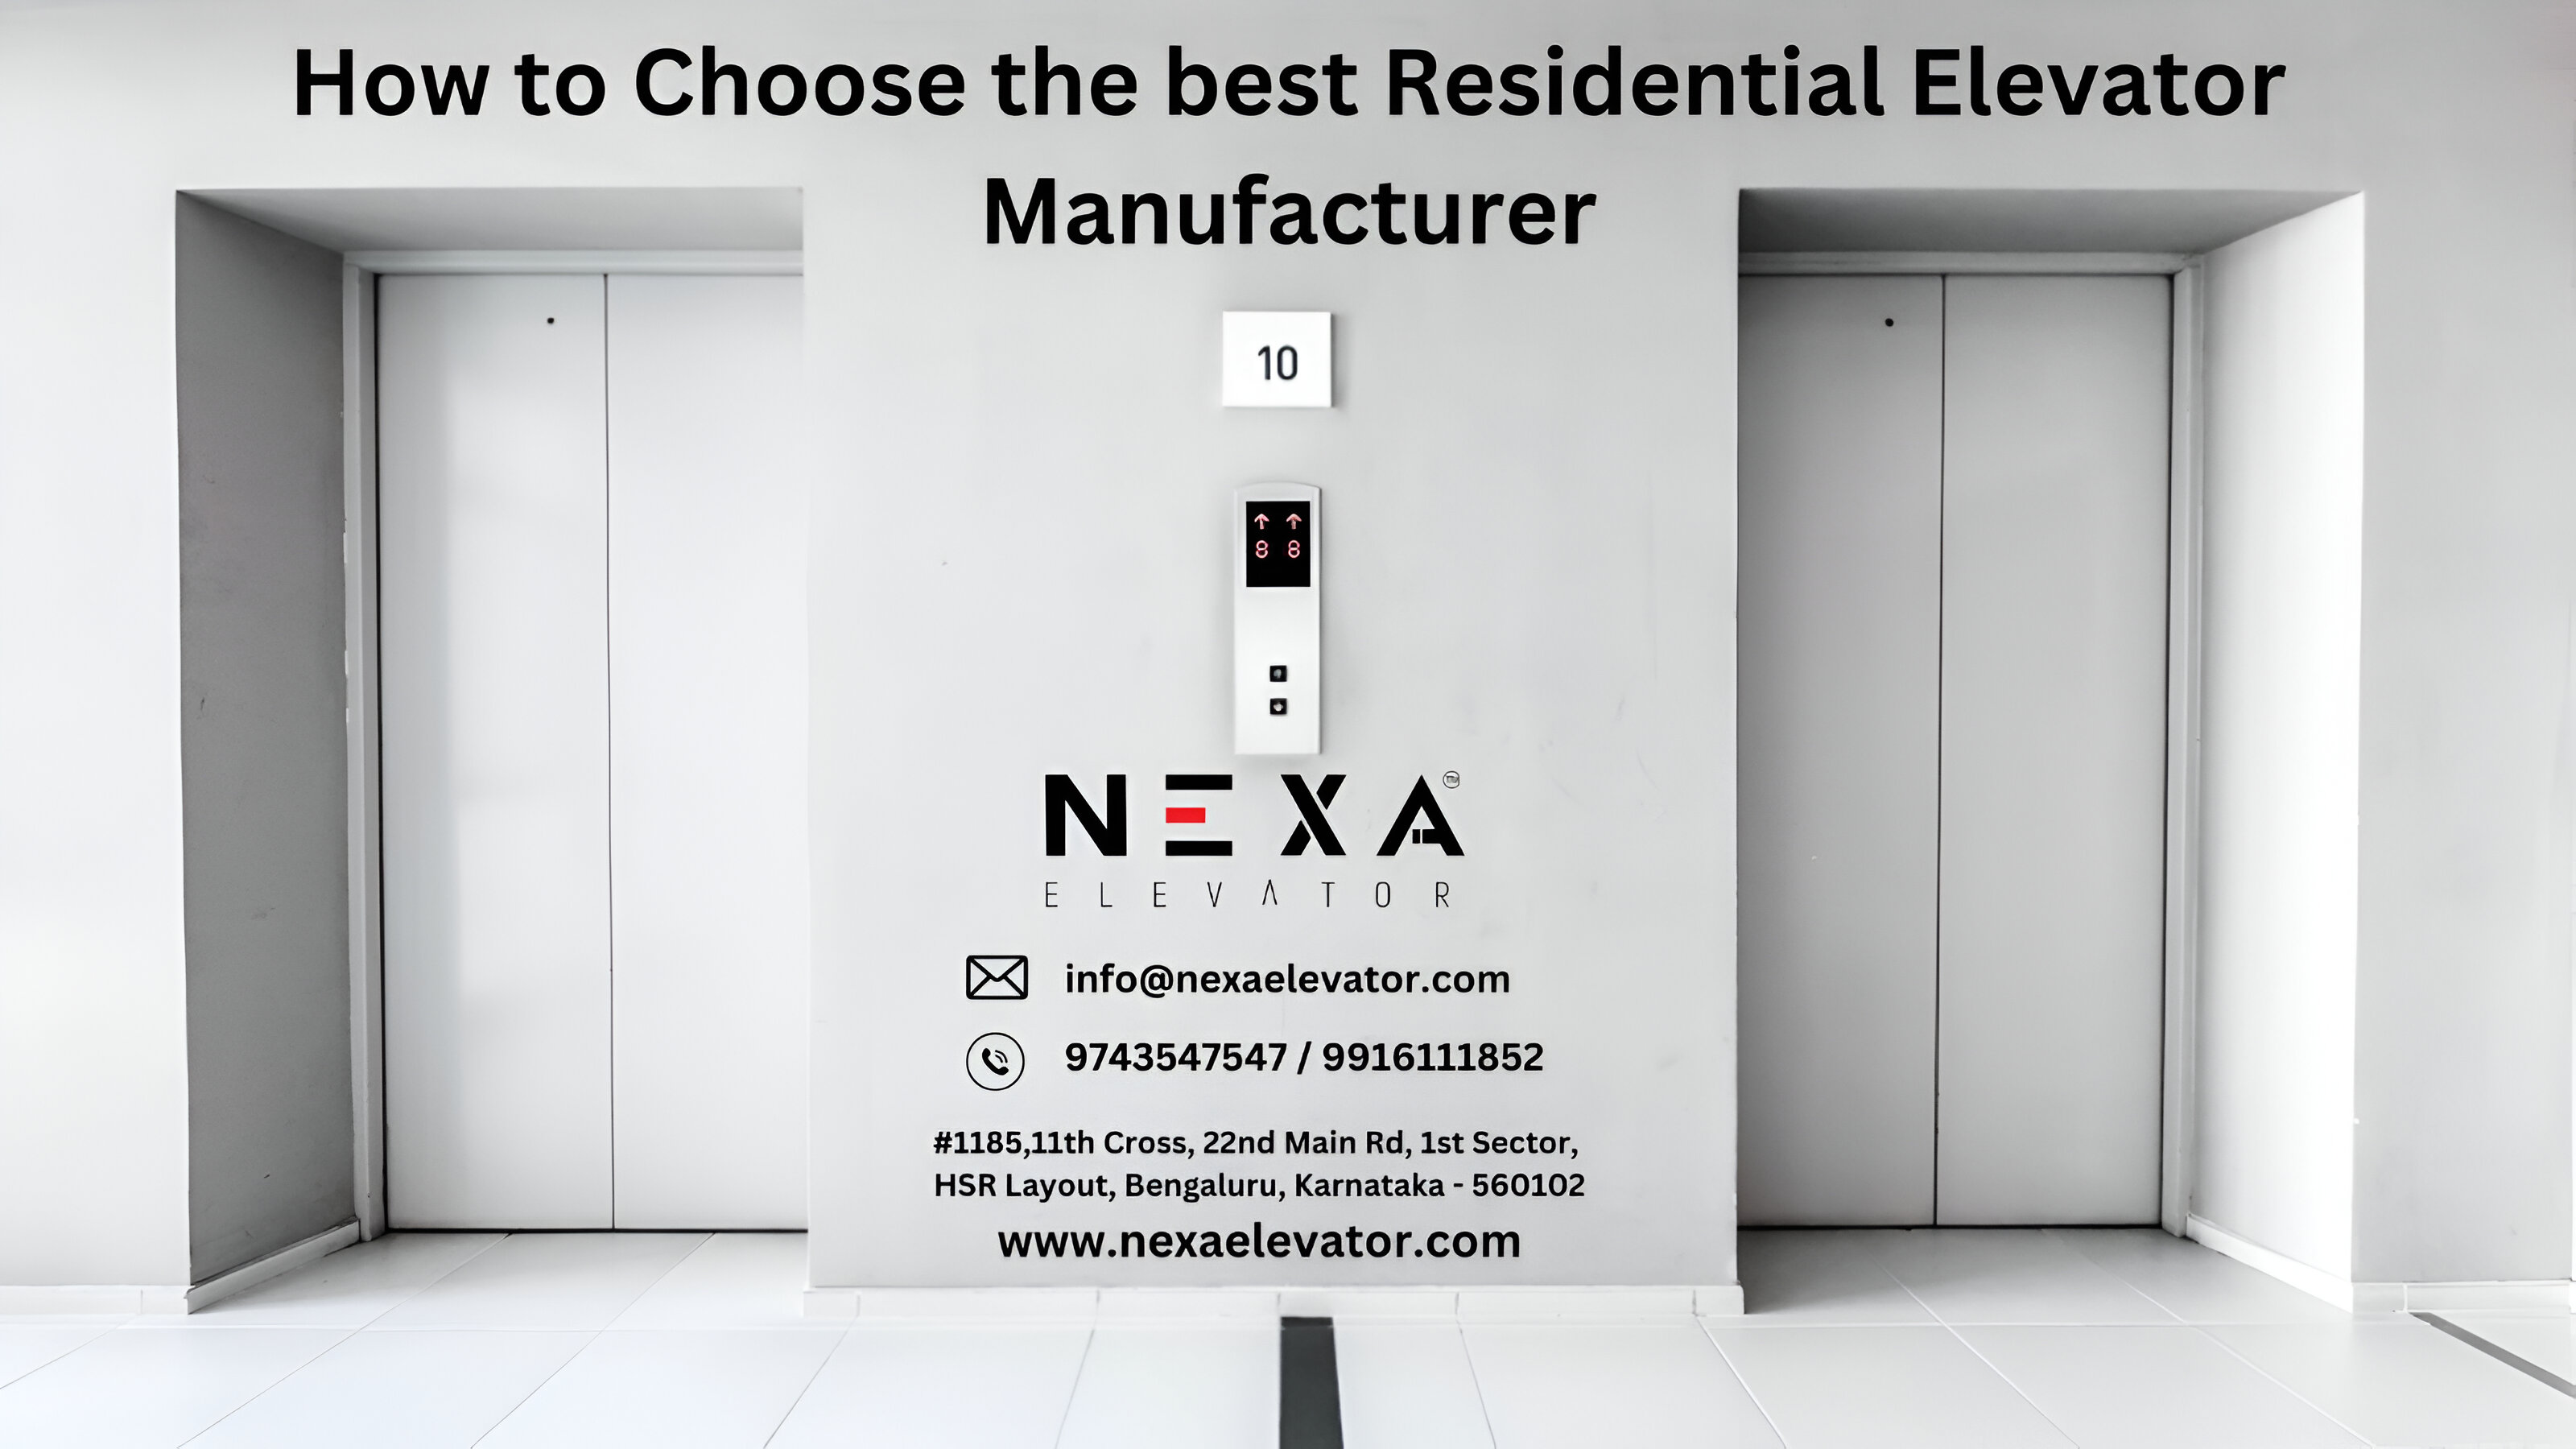 How to Choose the best Residential Elevator Manufacturer